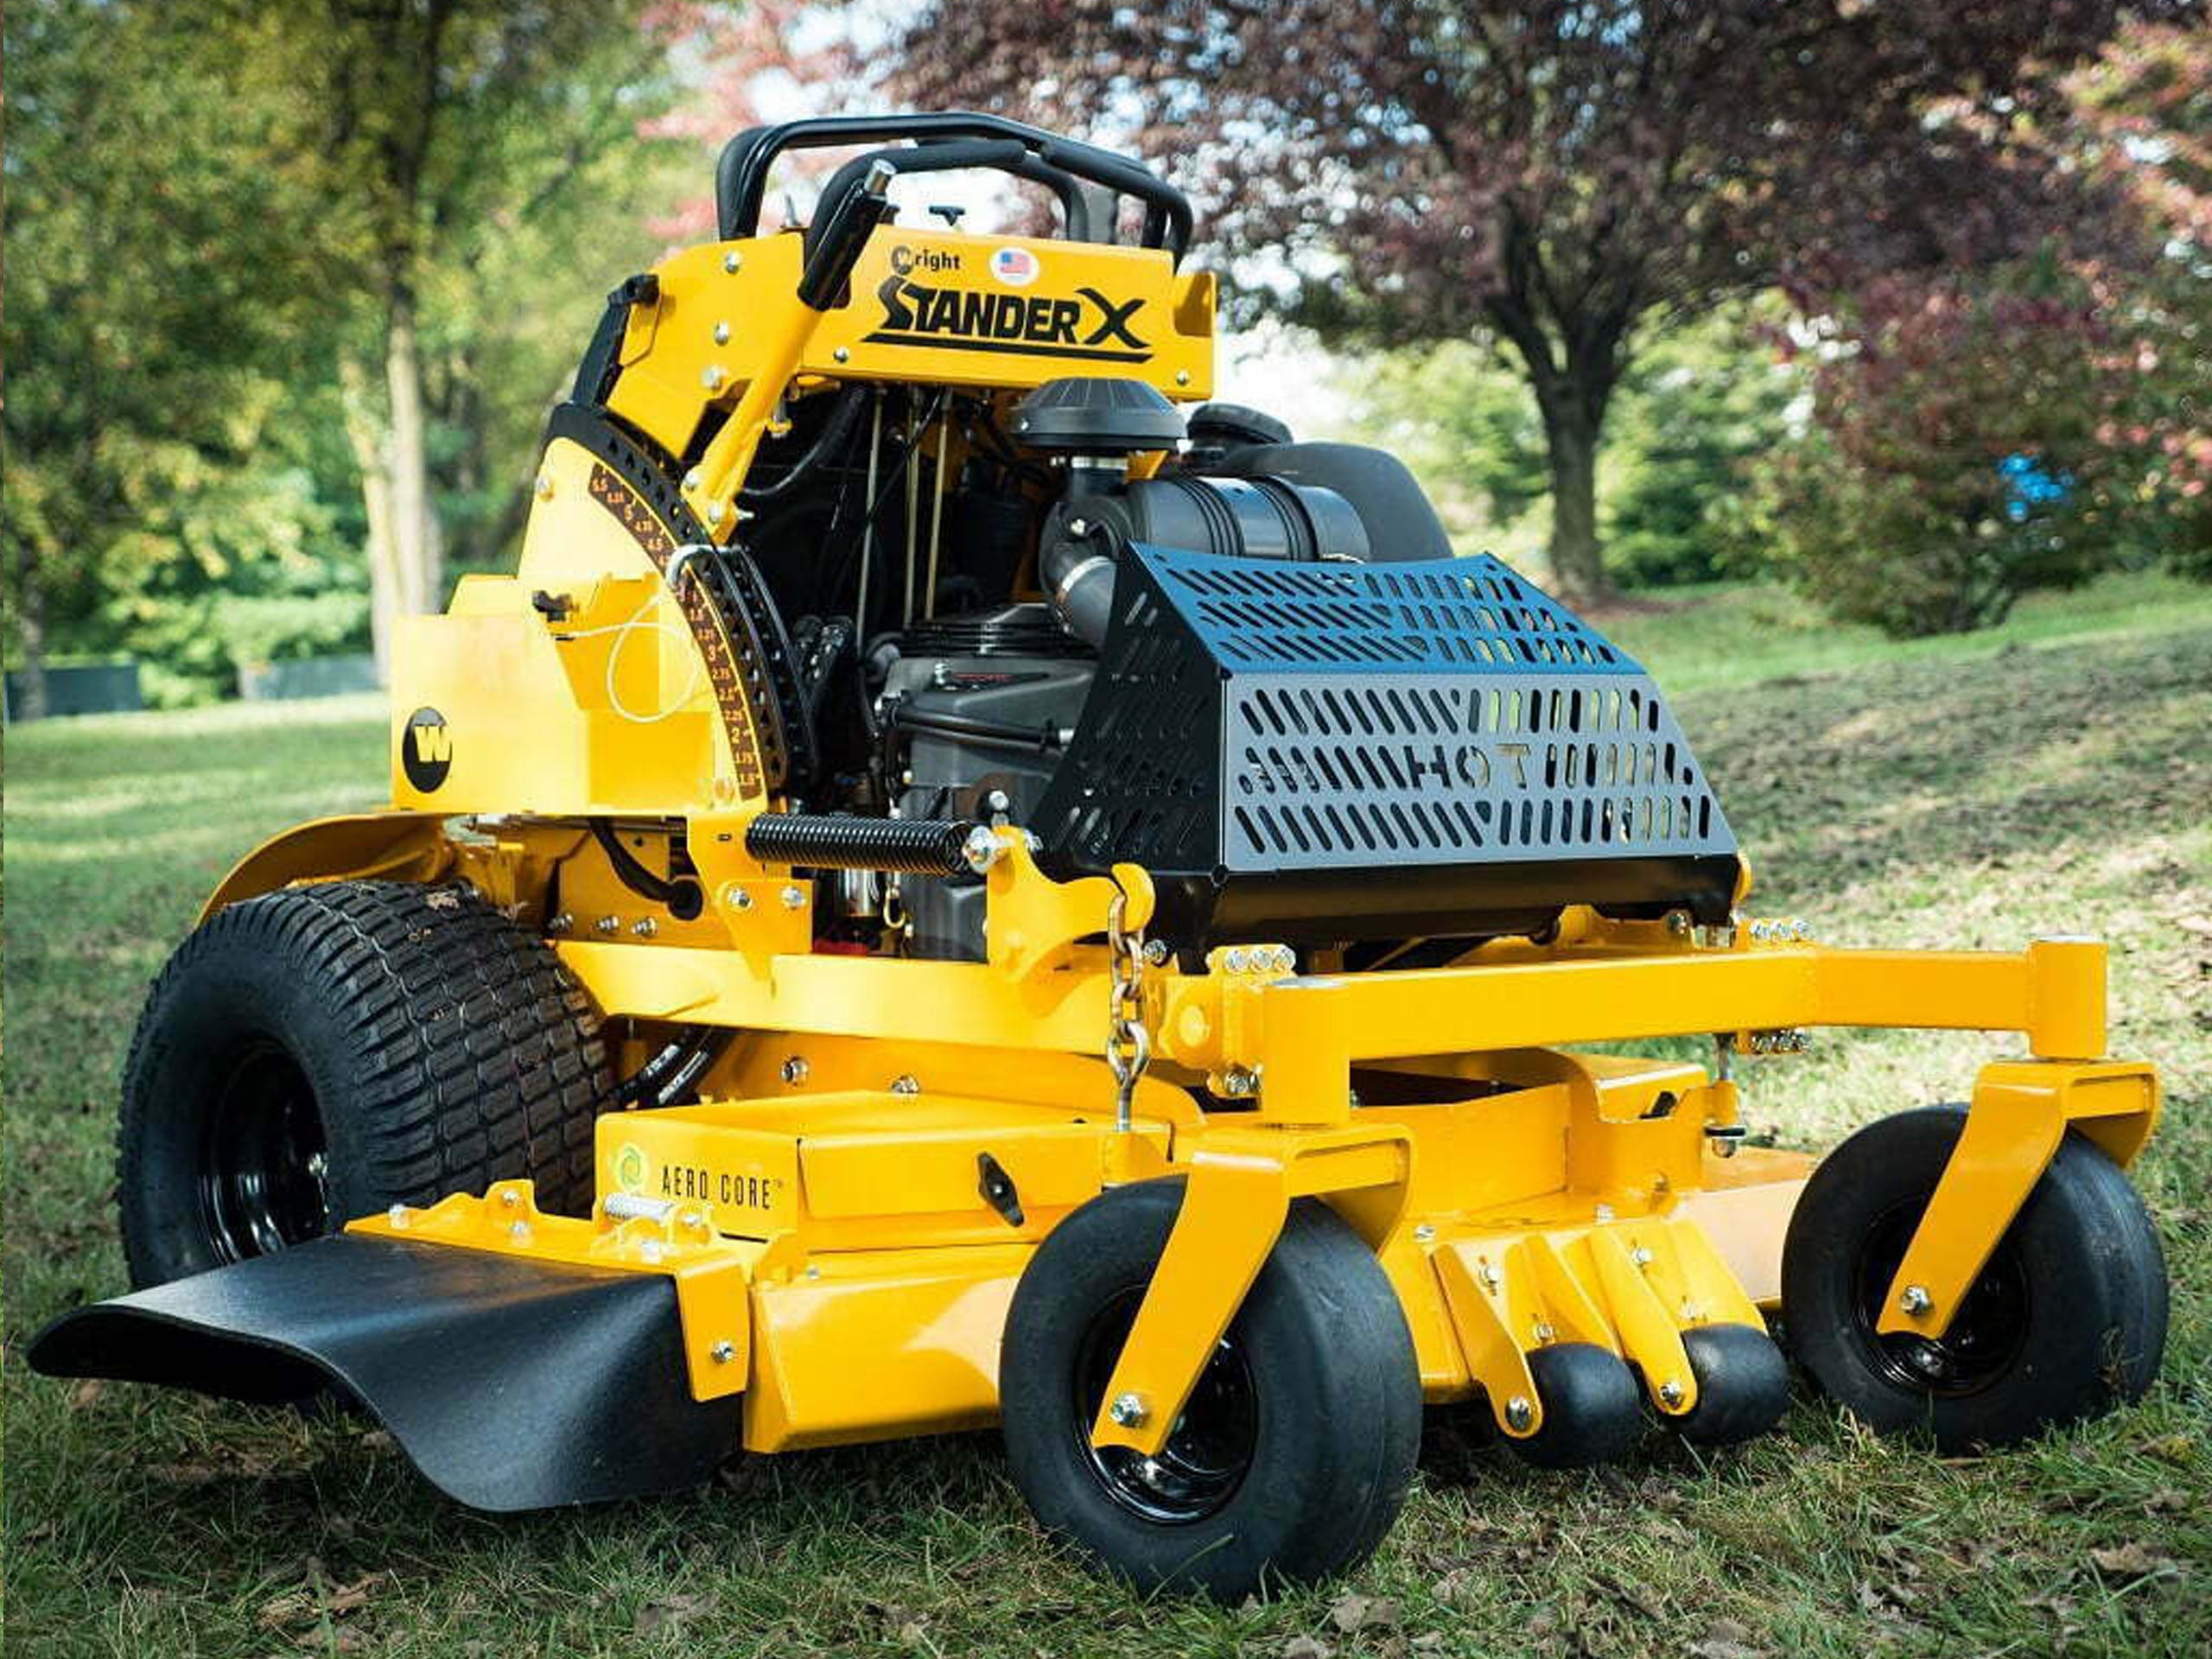 Photo of the COX Mowers Commercial Stander® X Gen2 Mower sitting on a lawn with trees in the background